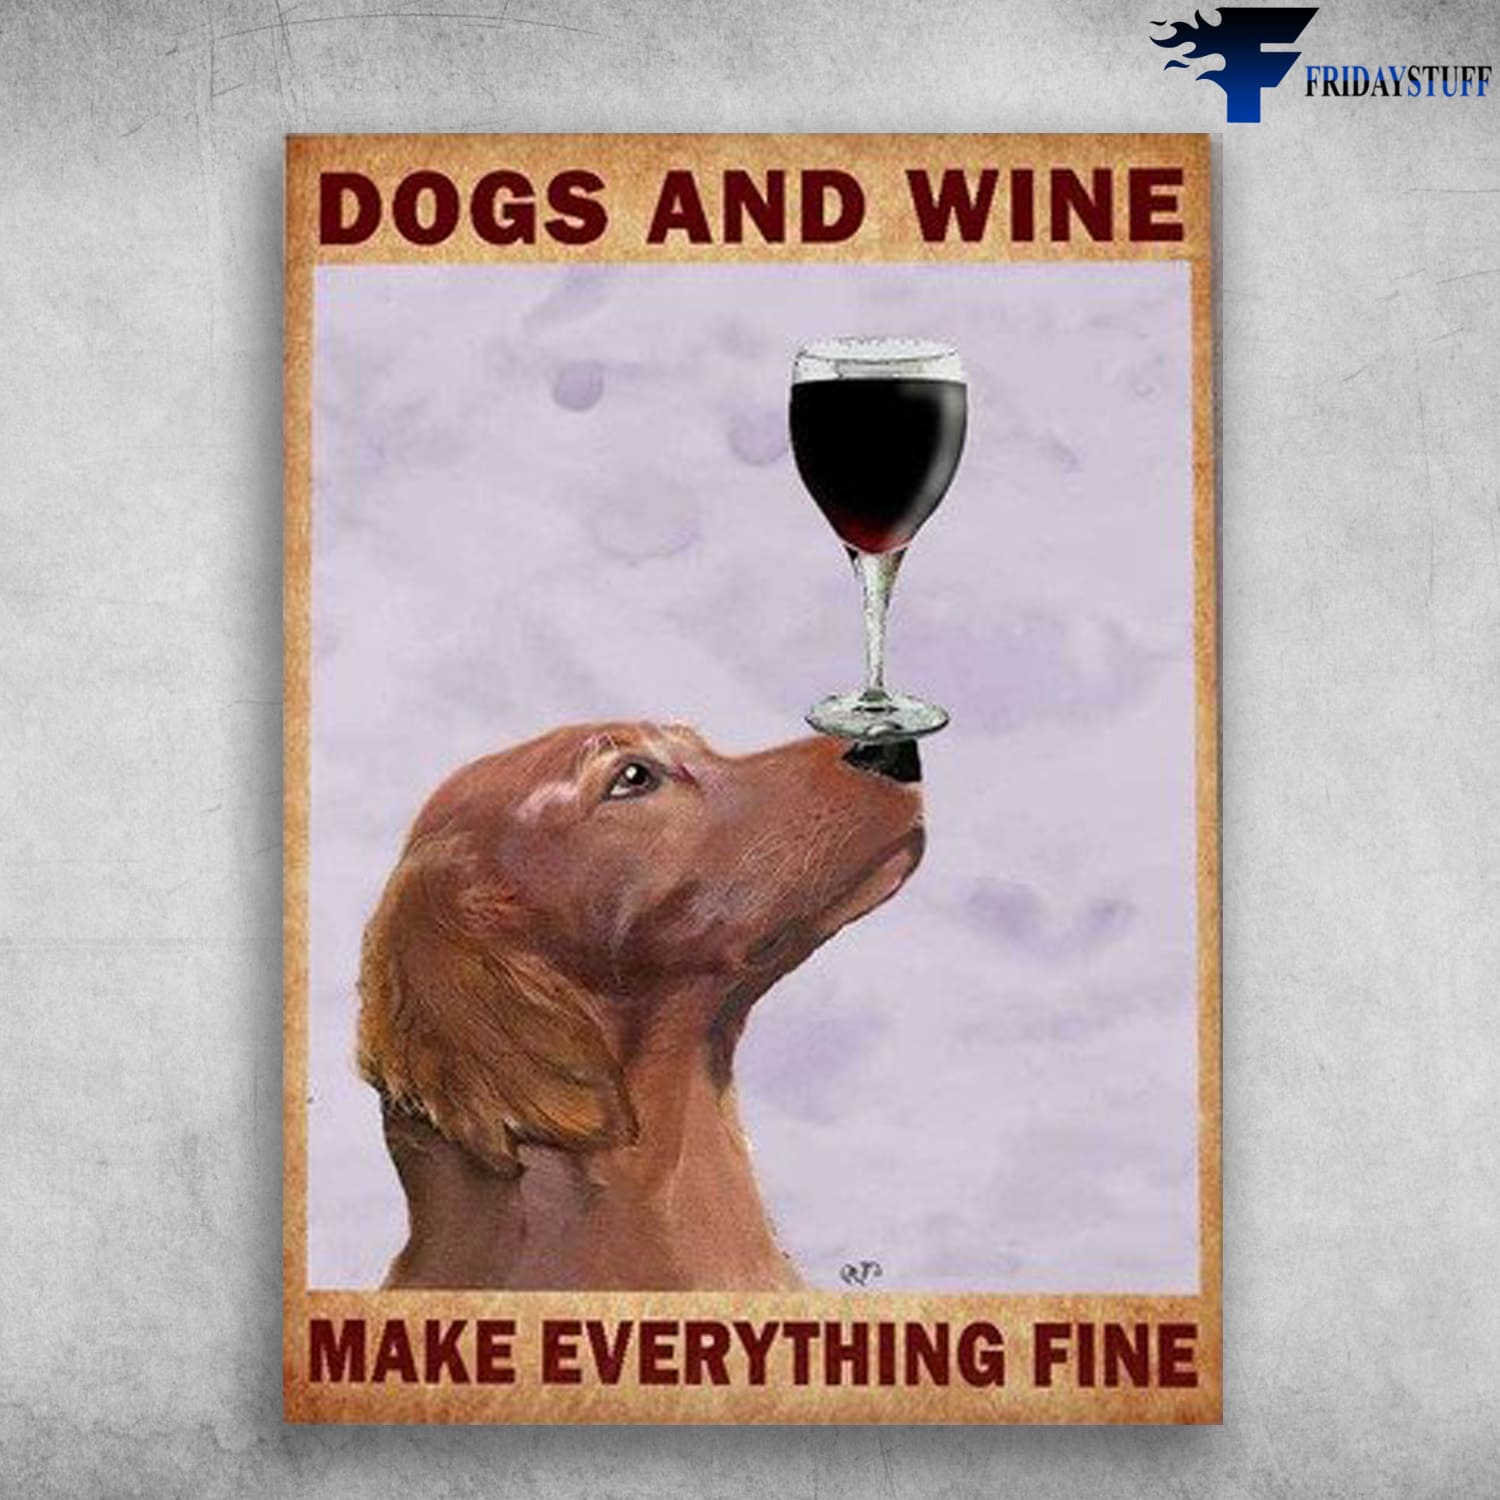 Golden Retriever, Dog And Wife, Dogs And Wife, Make Everything Fine